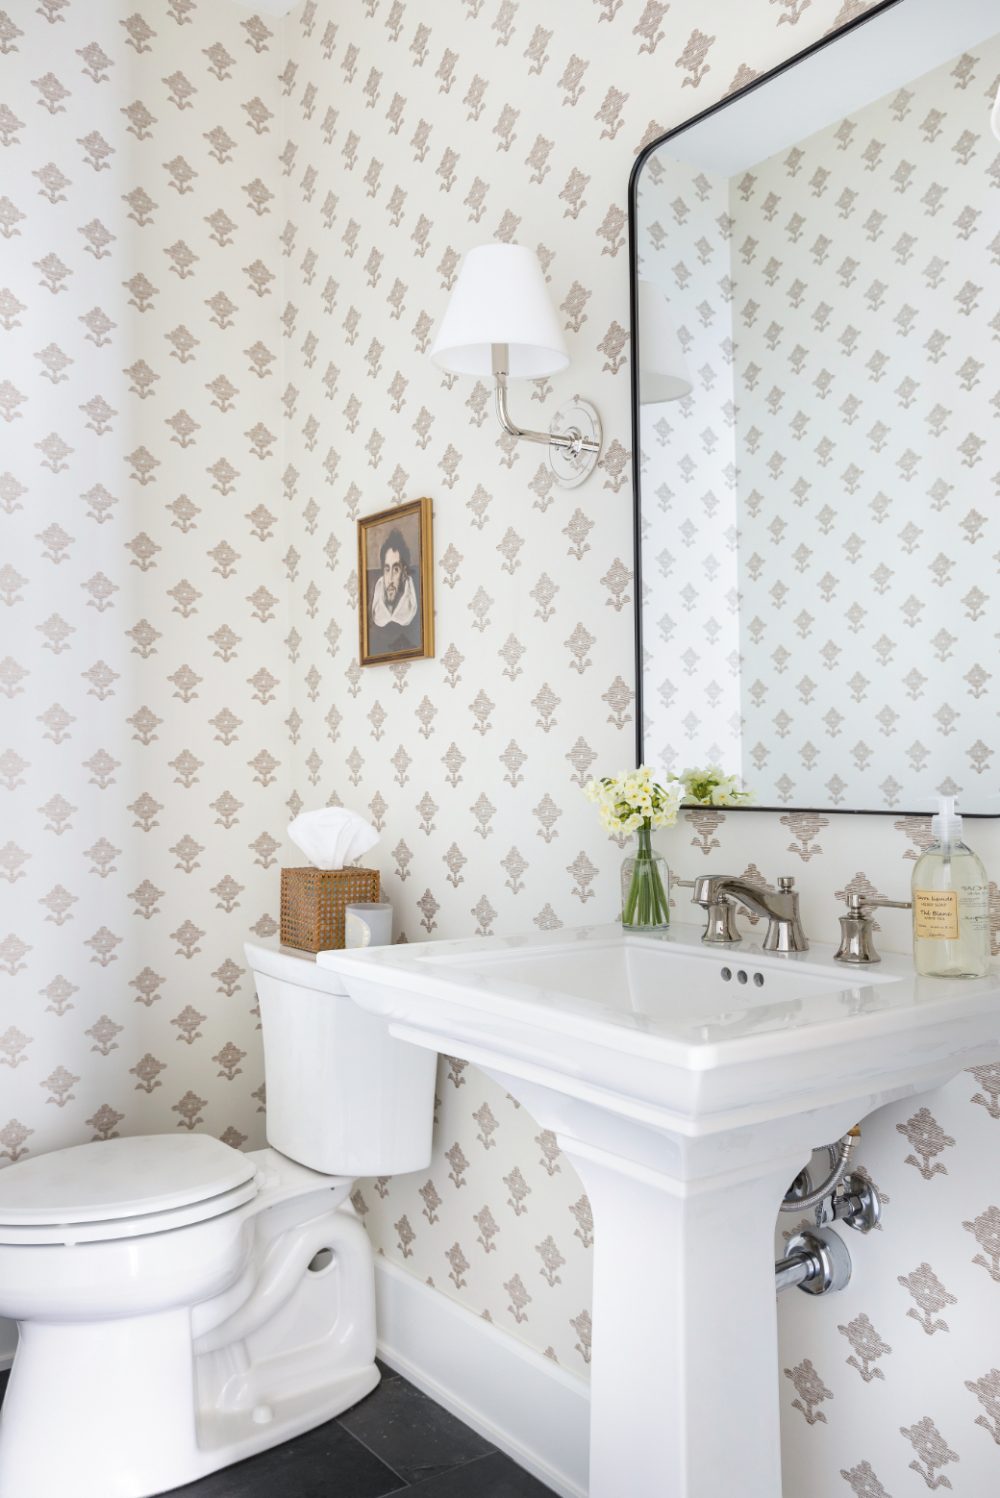 France Ave. Project Reveal | Bria Hammel Interiors